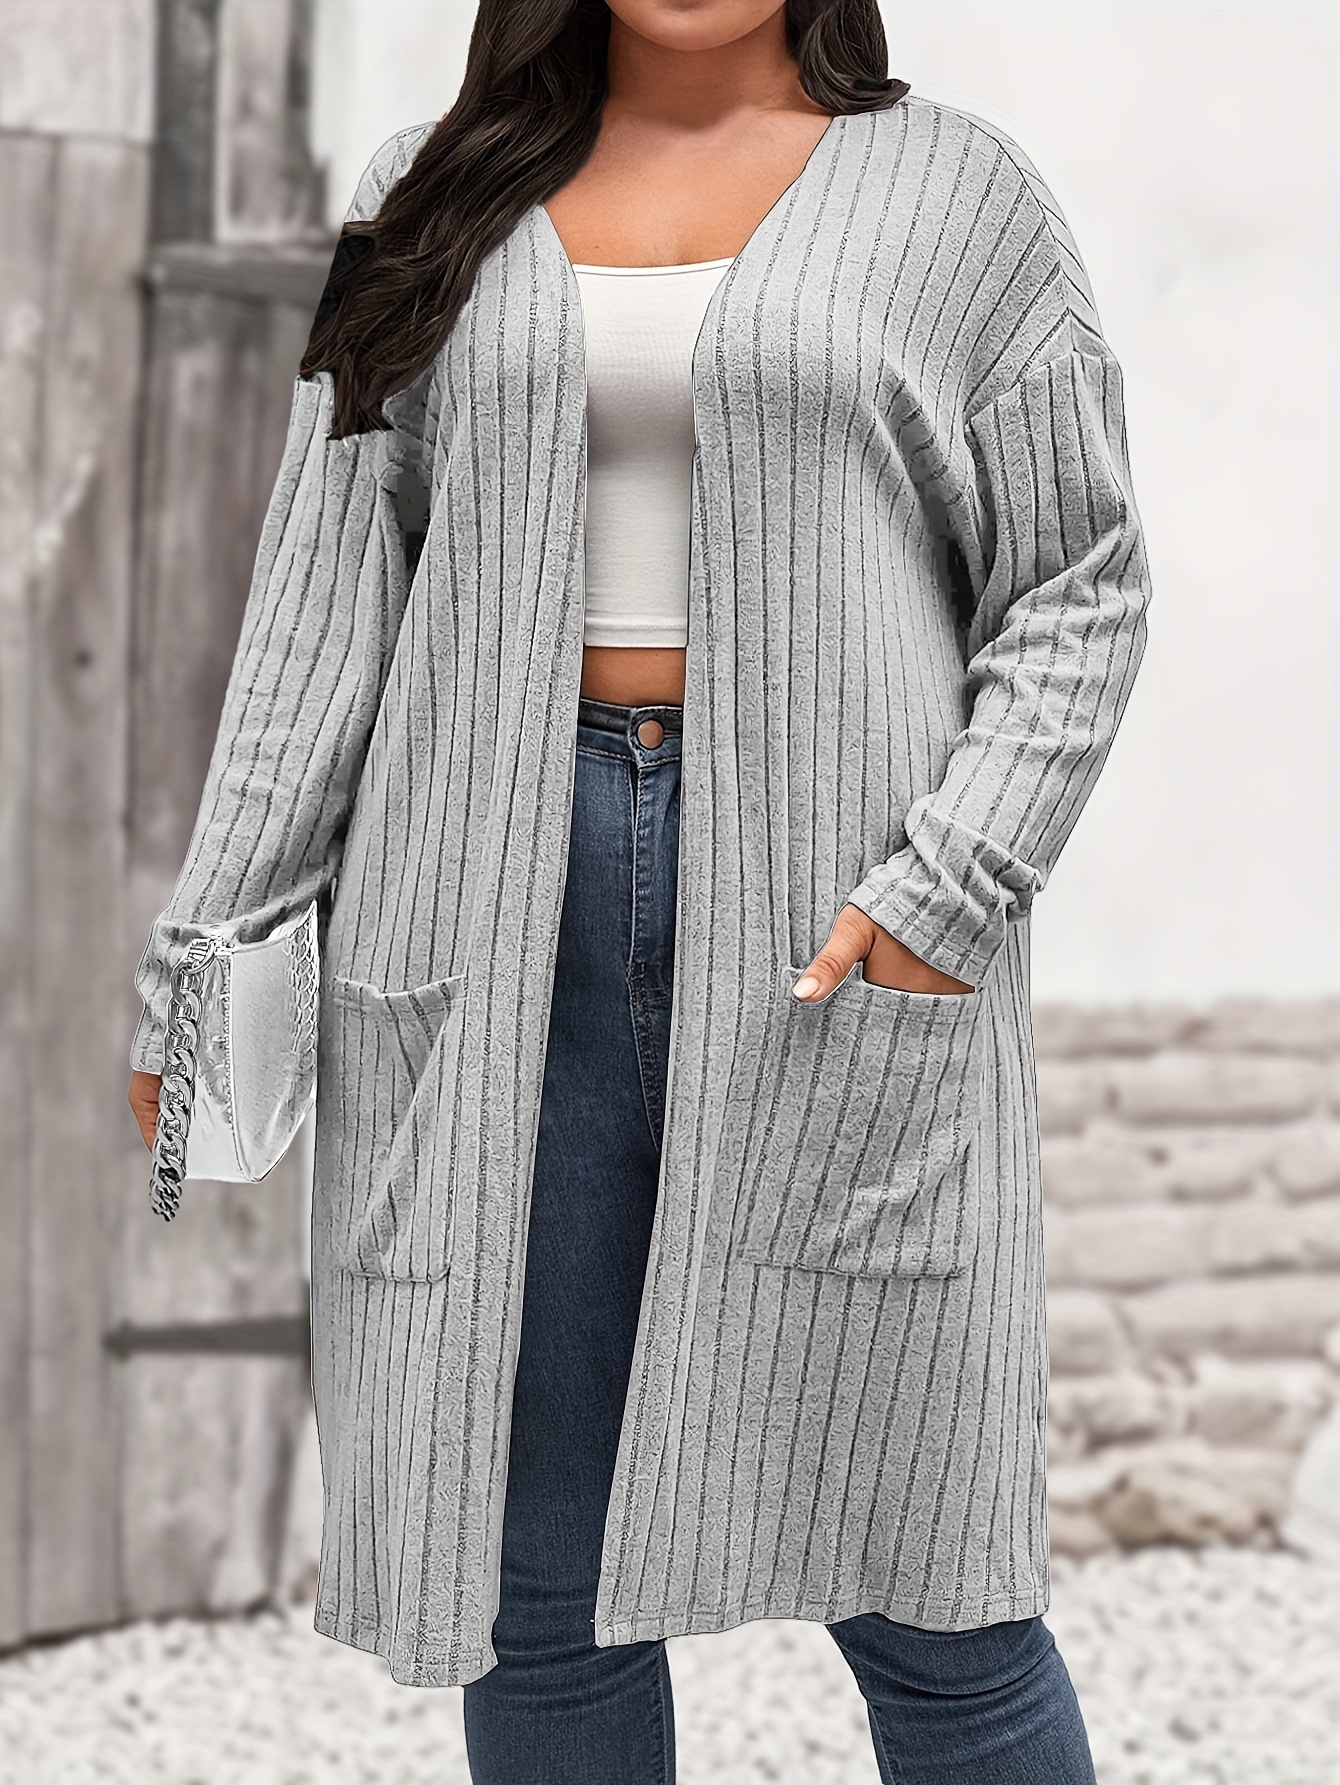 Plus Size Relaxed Cardigan Sweater (tunic length) rts – Pretty Please  Leggings